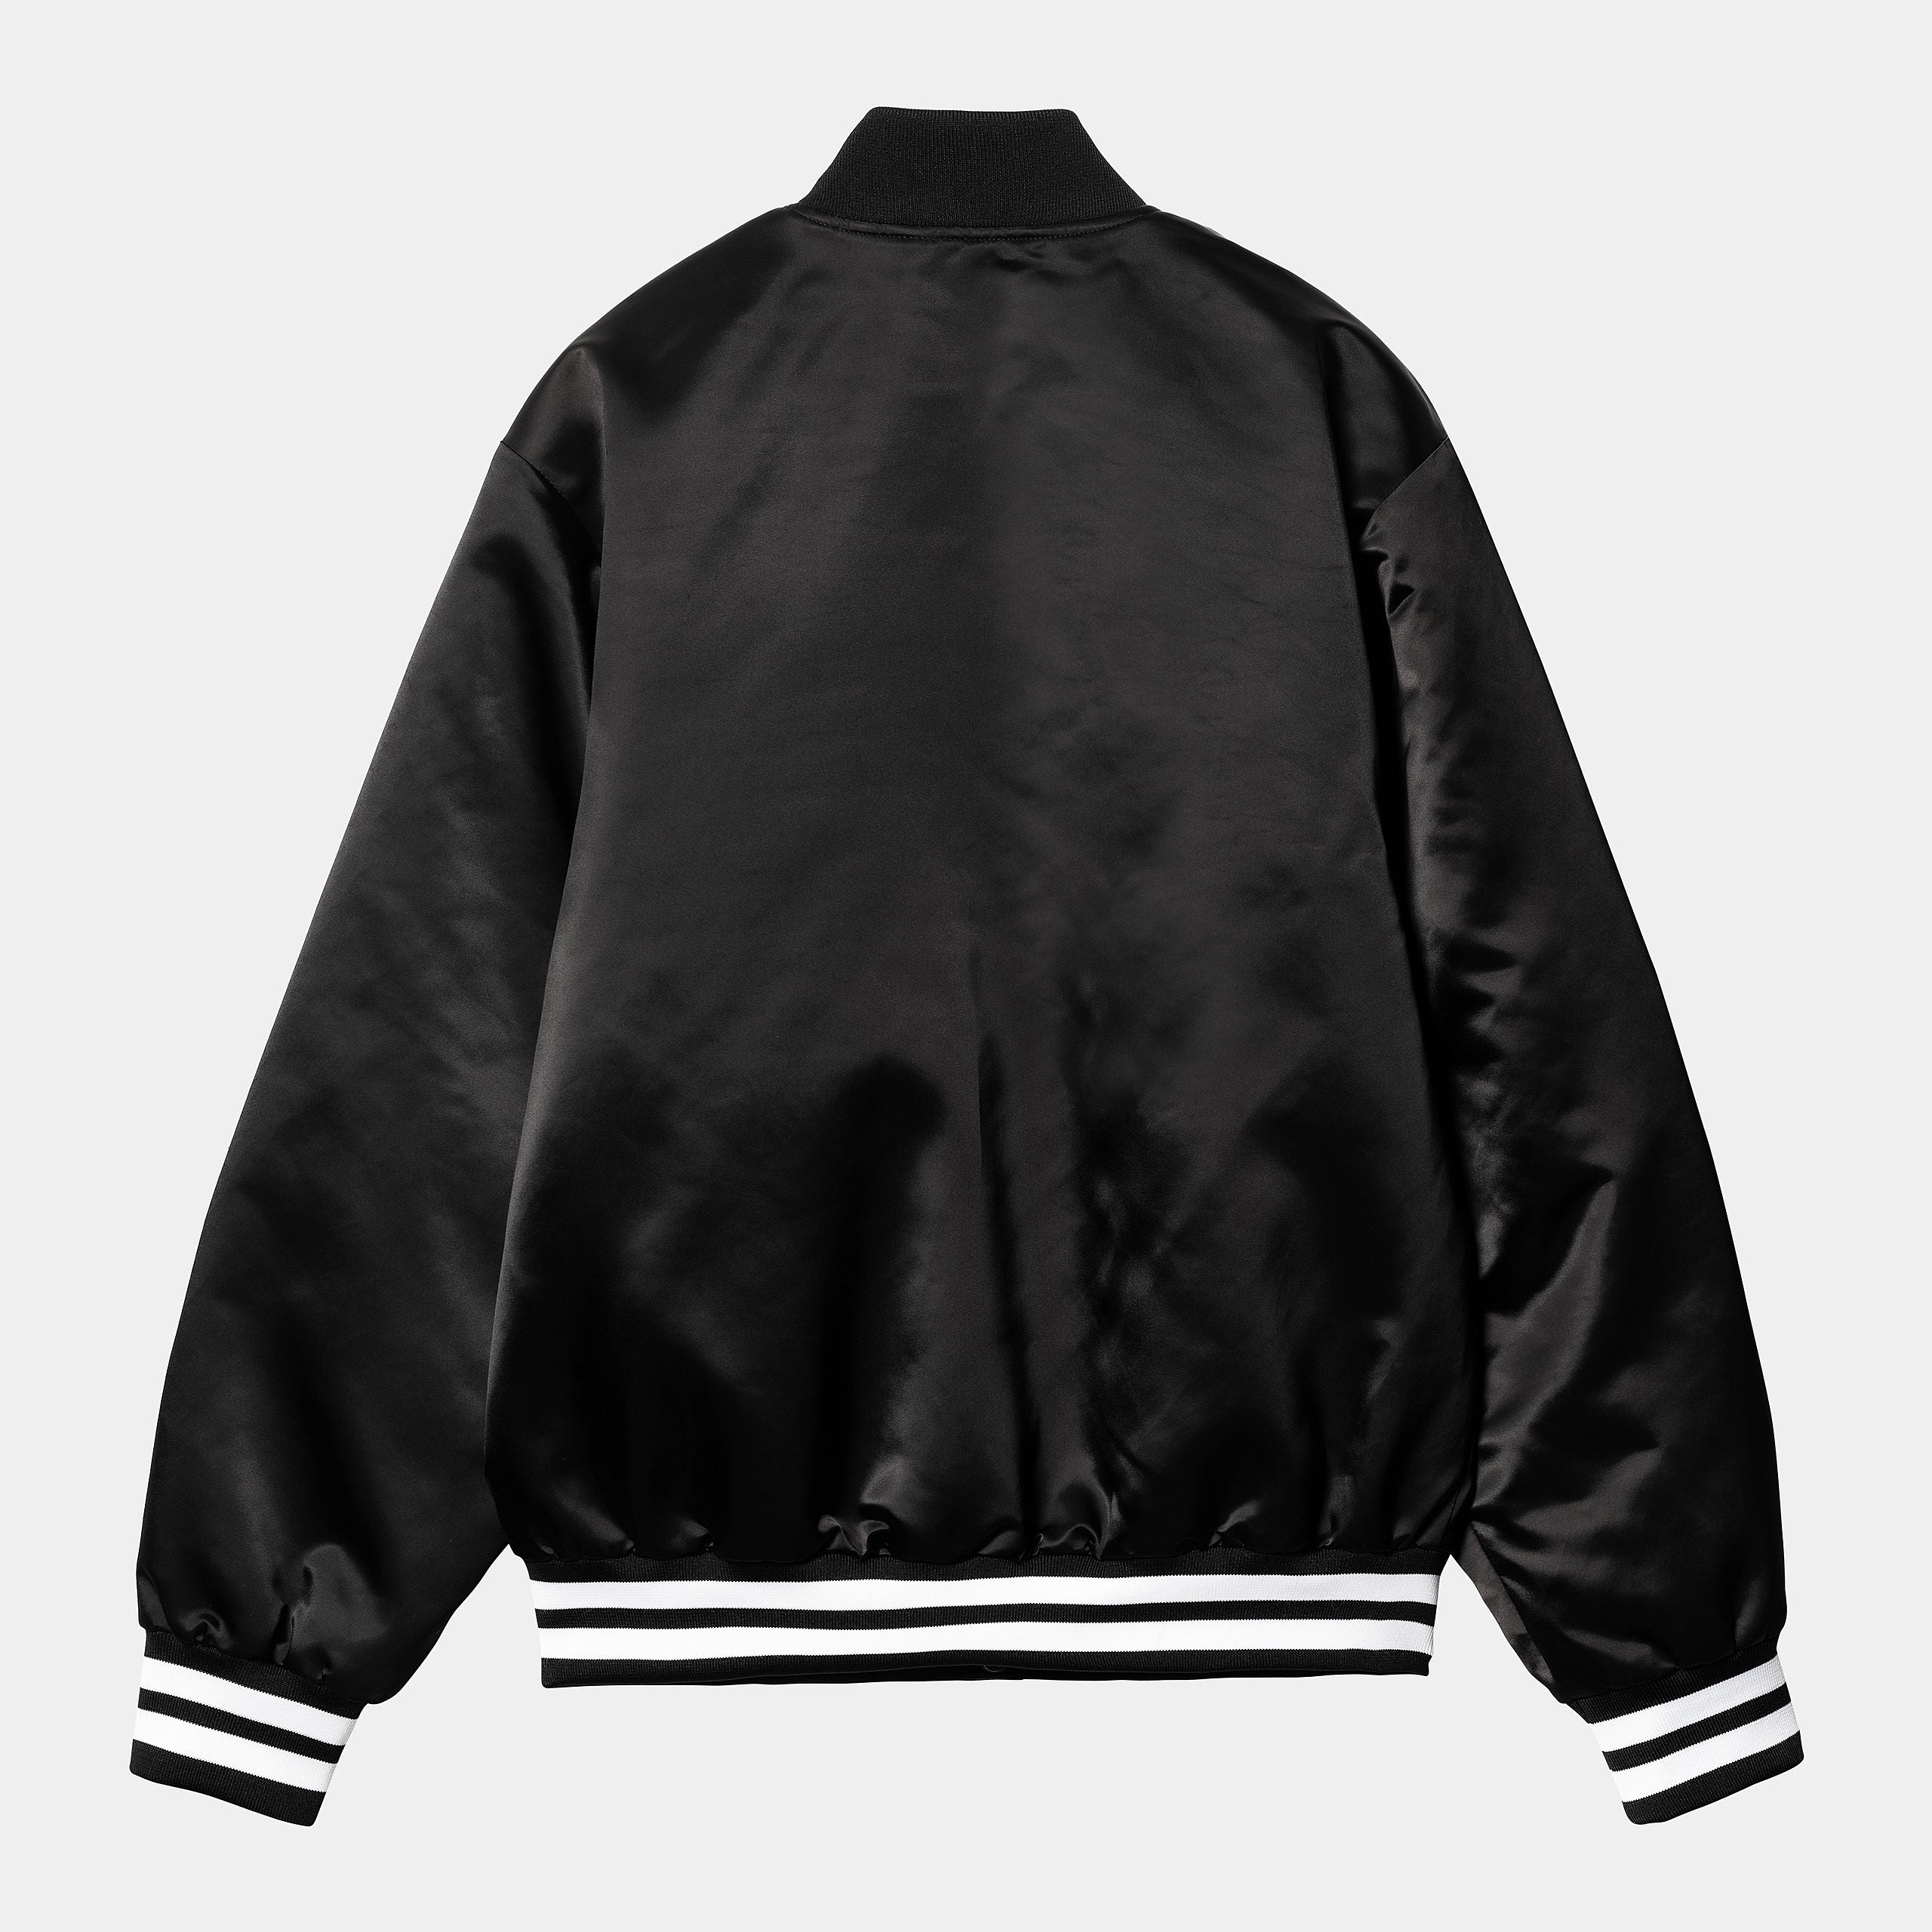 CLASS OF 89 BOMBER JACKET素材ナイロン